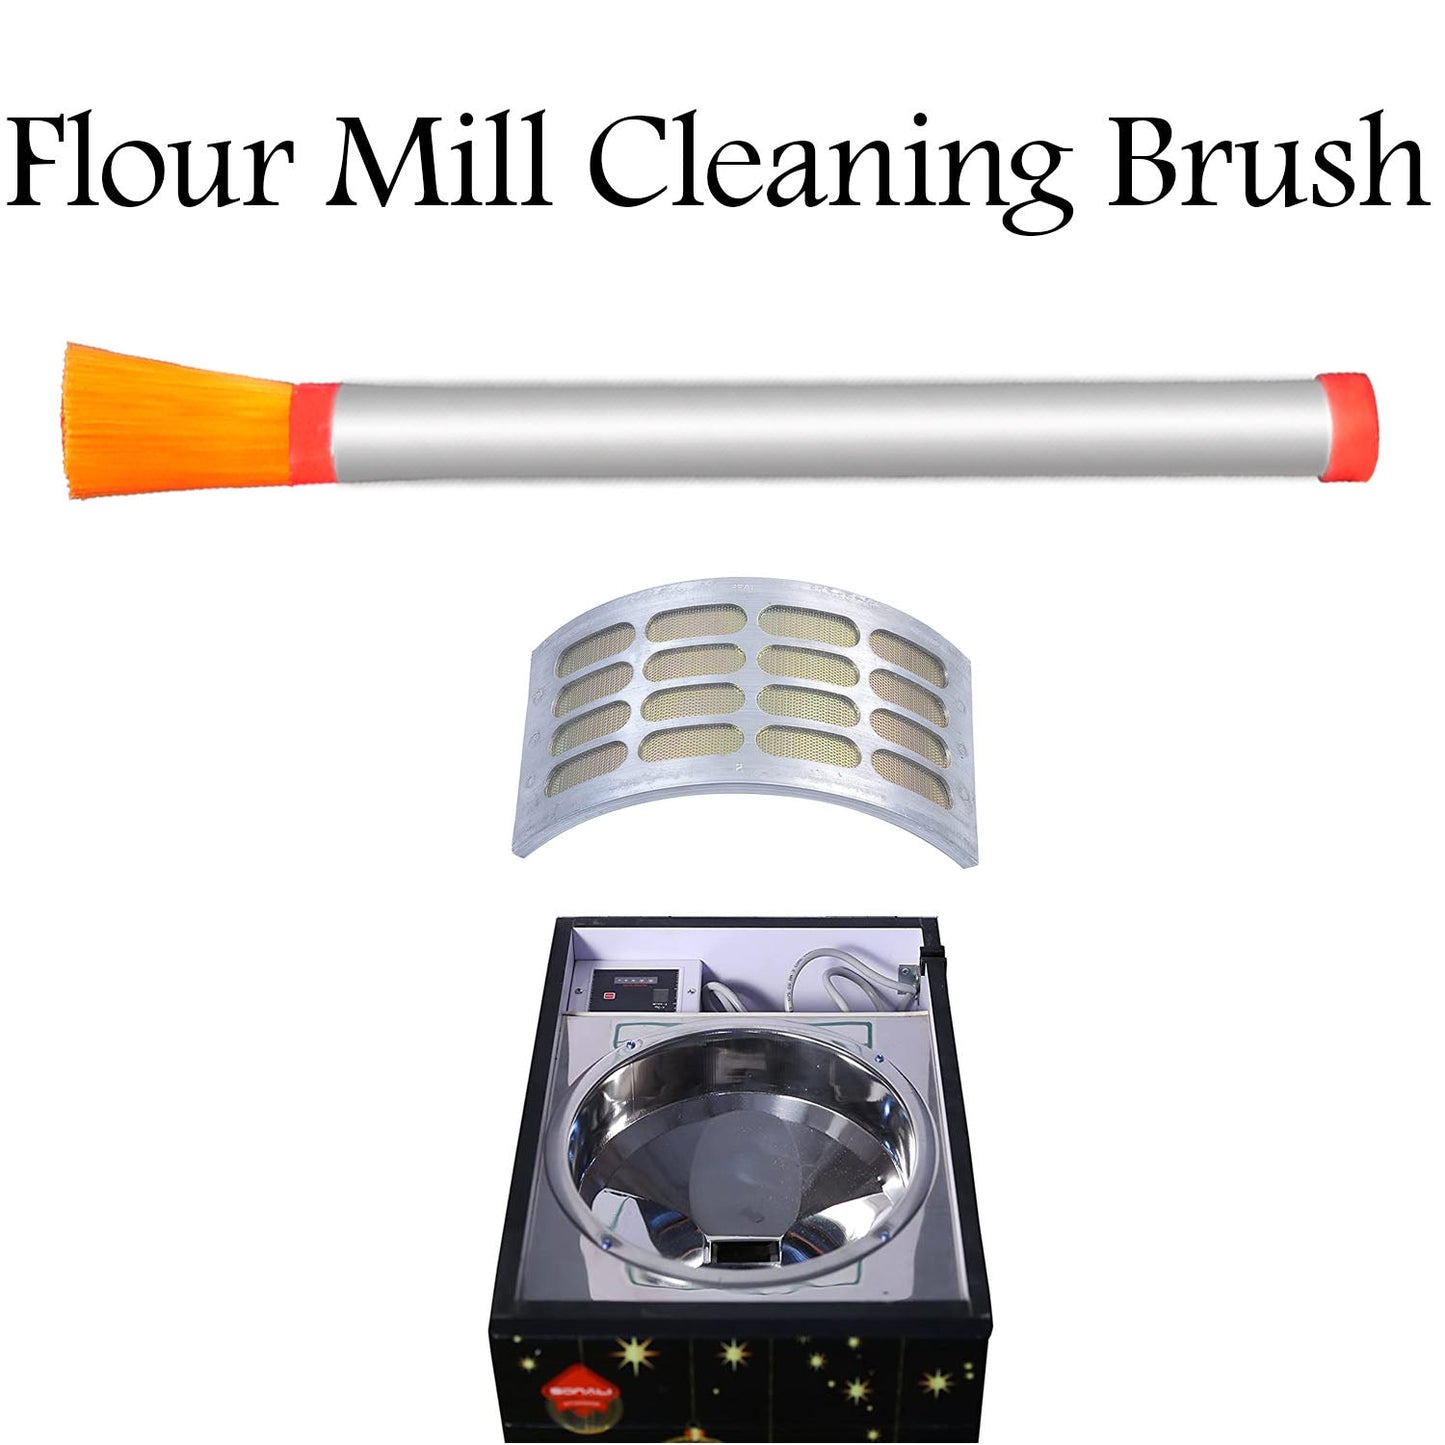 Dust Cleaning Brush for Deep Cleansteel bodyperfect size